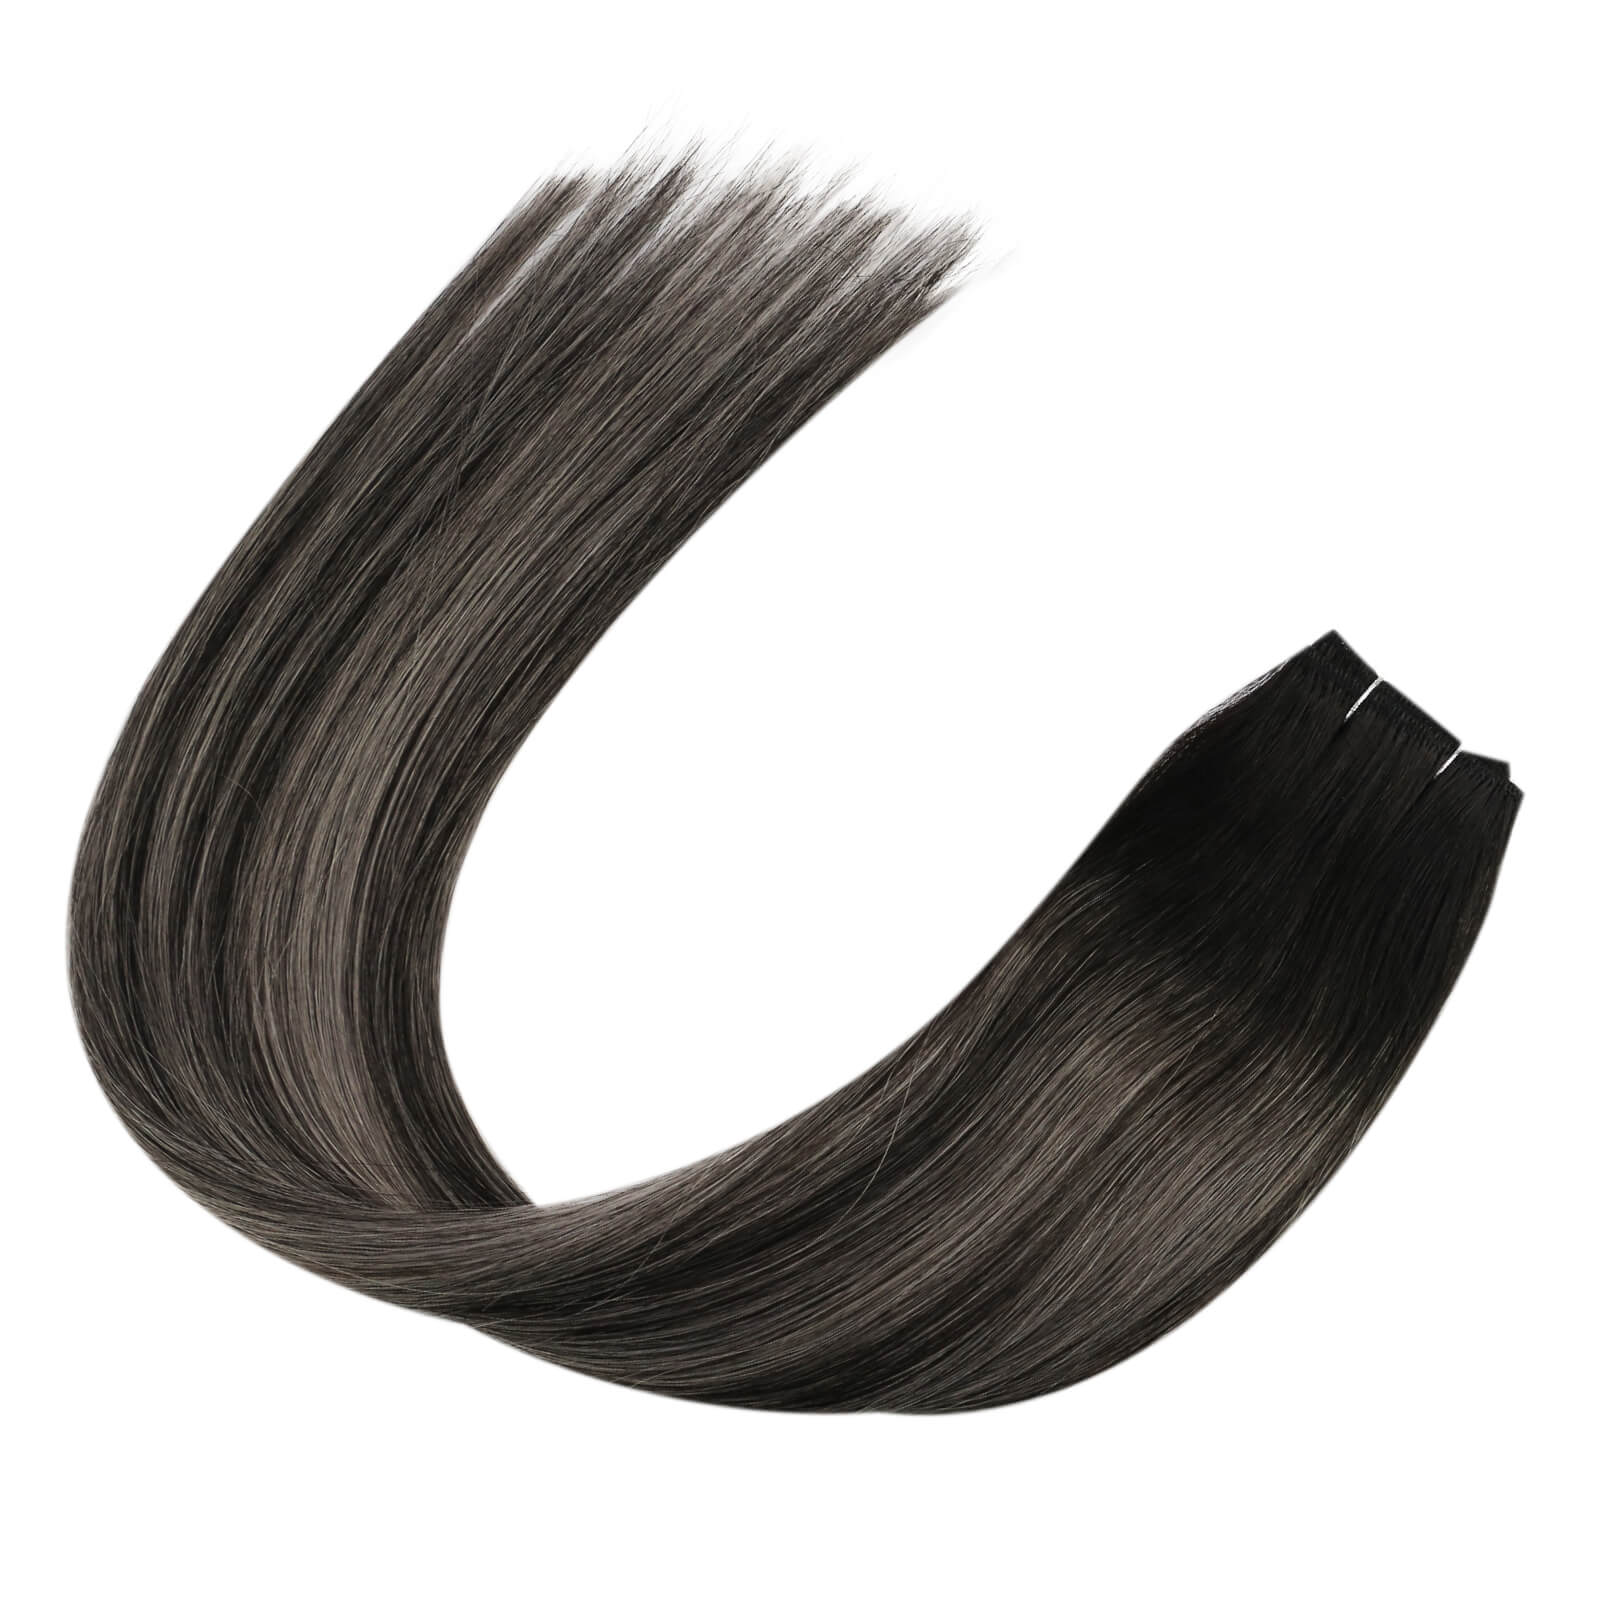 Sew in hair weft balayage color professional hair extension suppliers